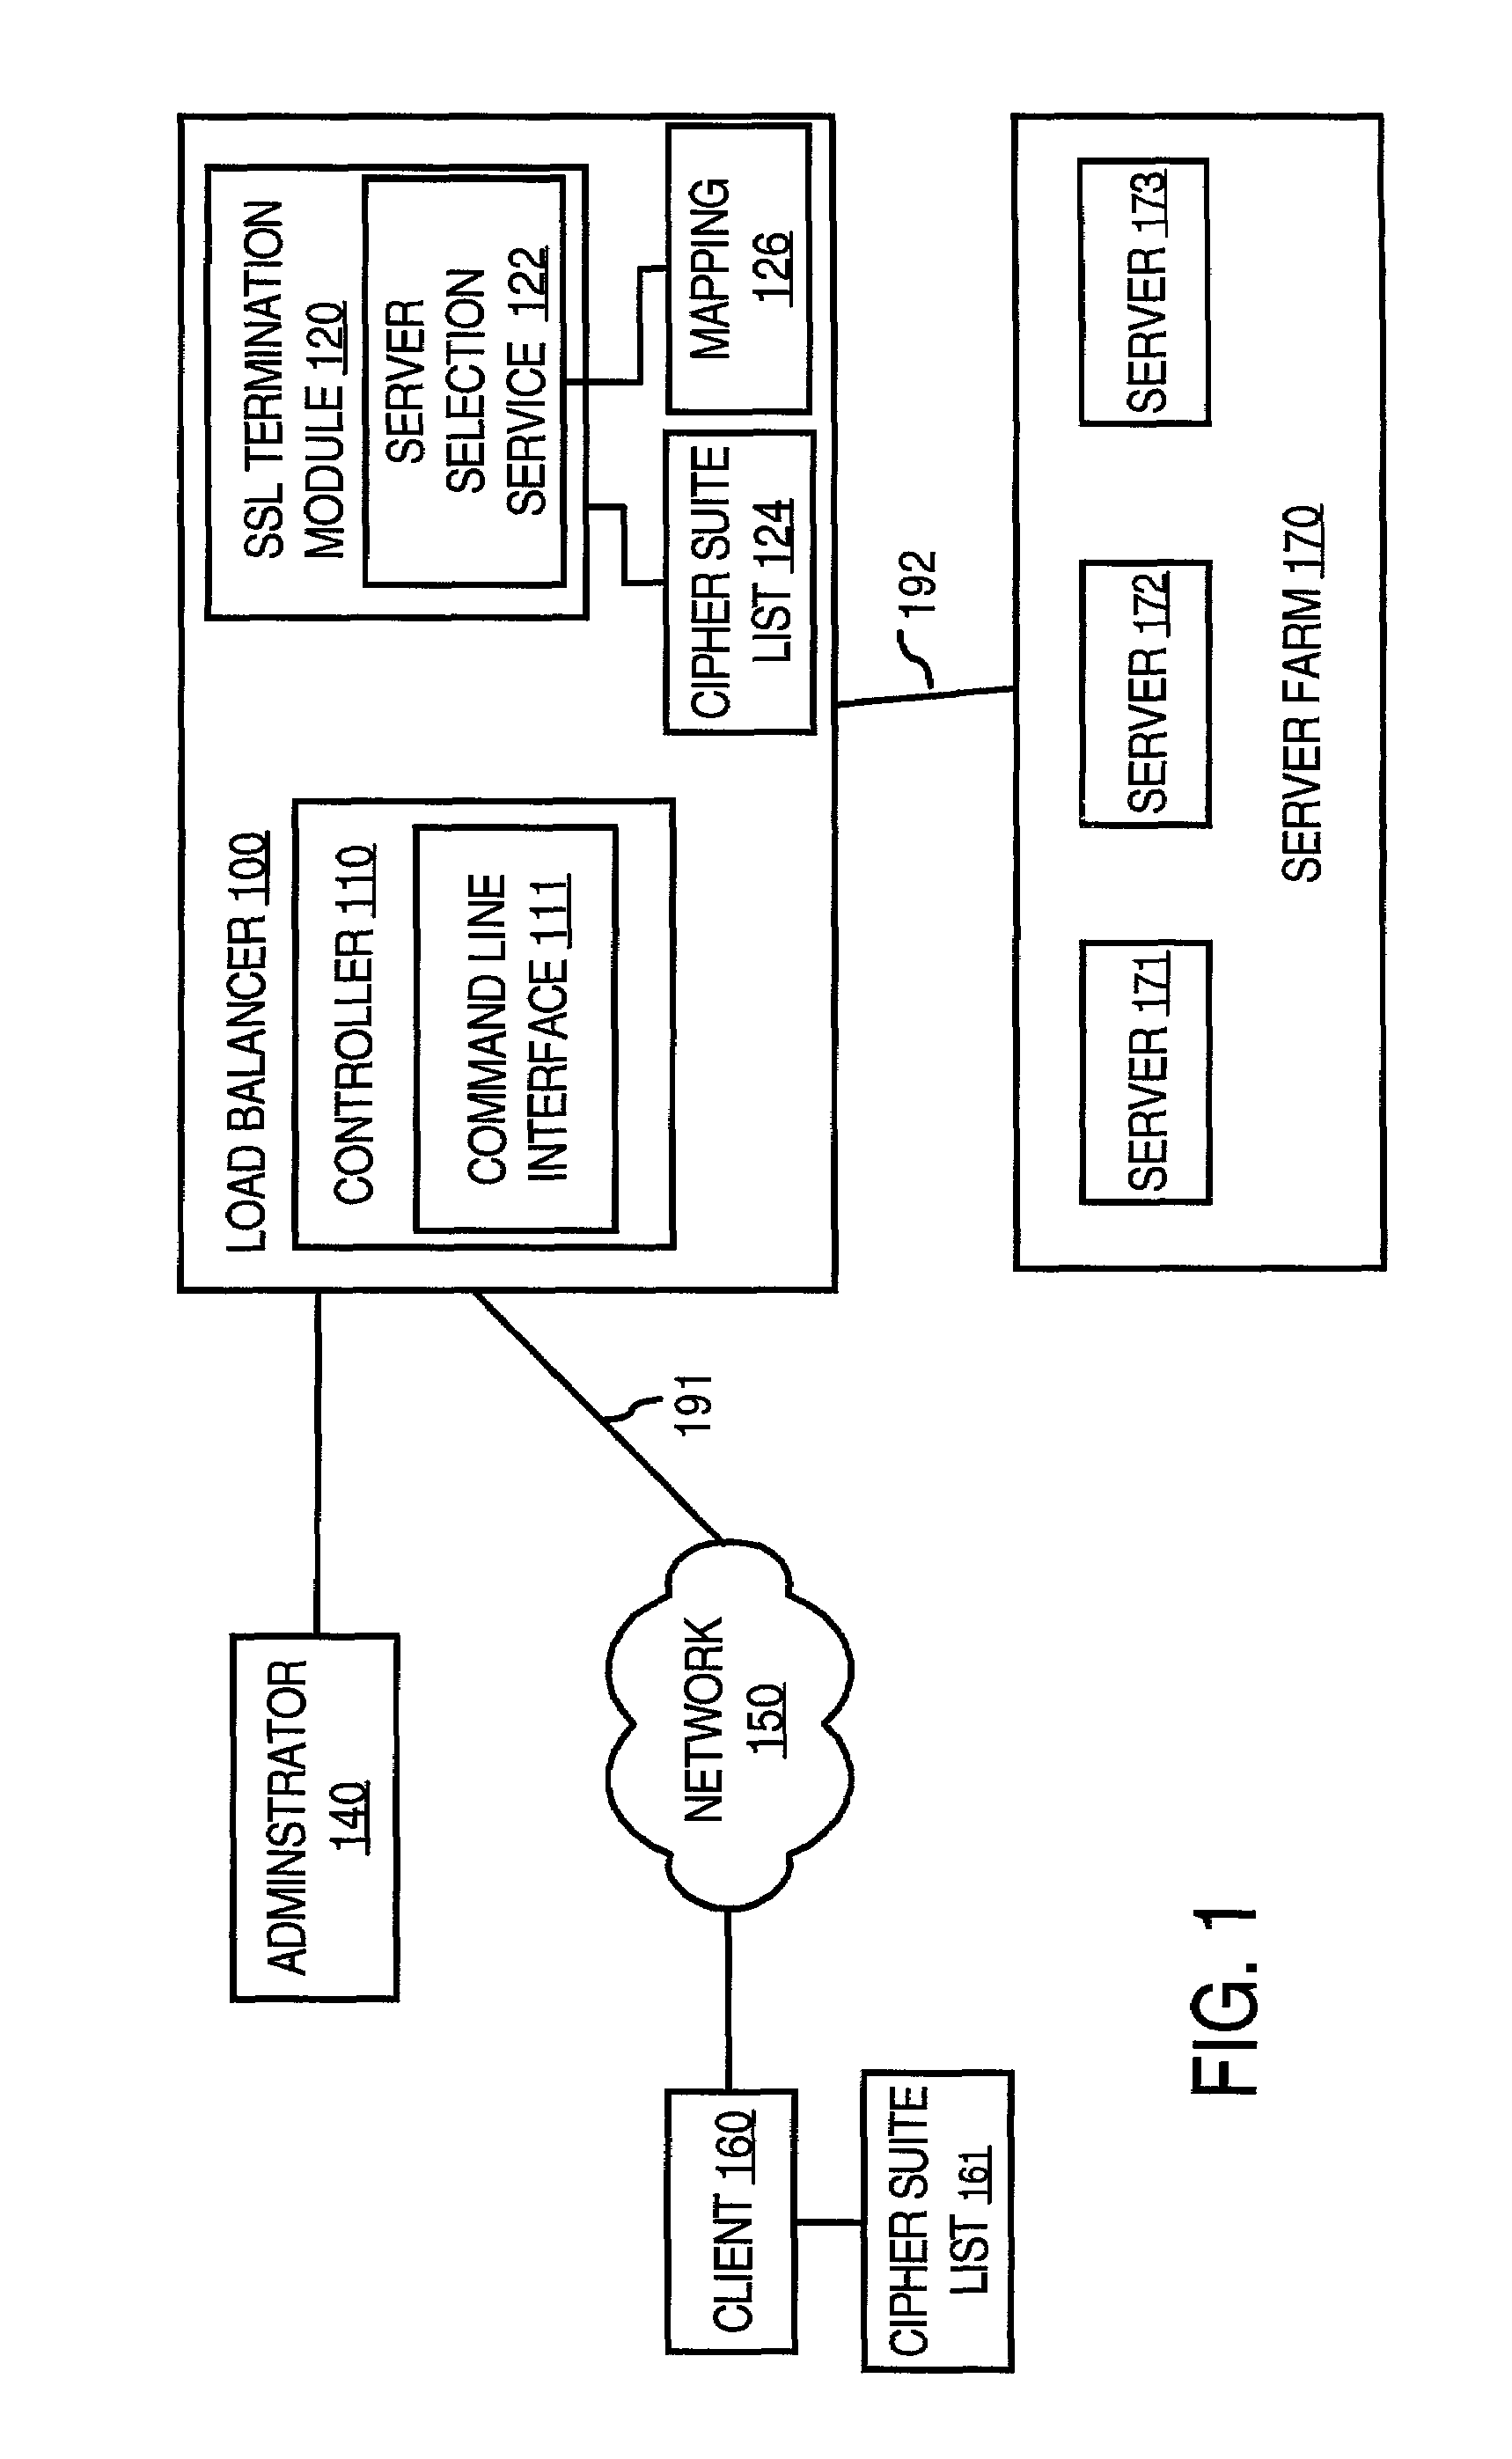 Method and apparatus for providing data from a service to a client based on encryption capabilities of the client